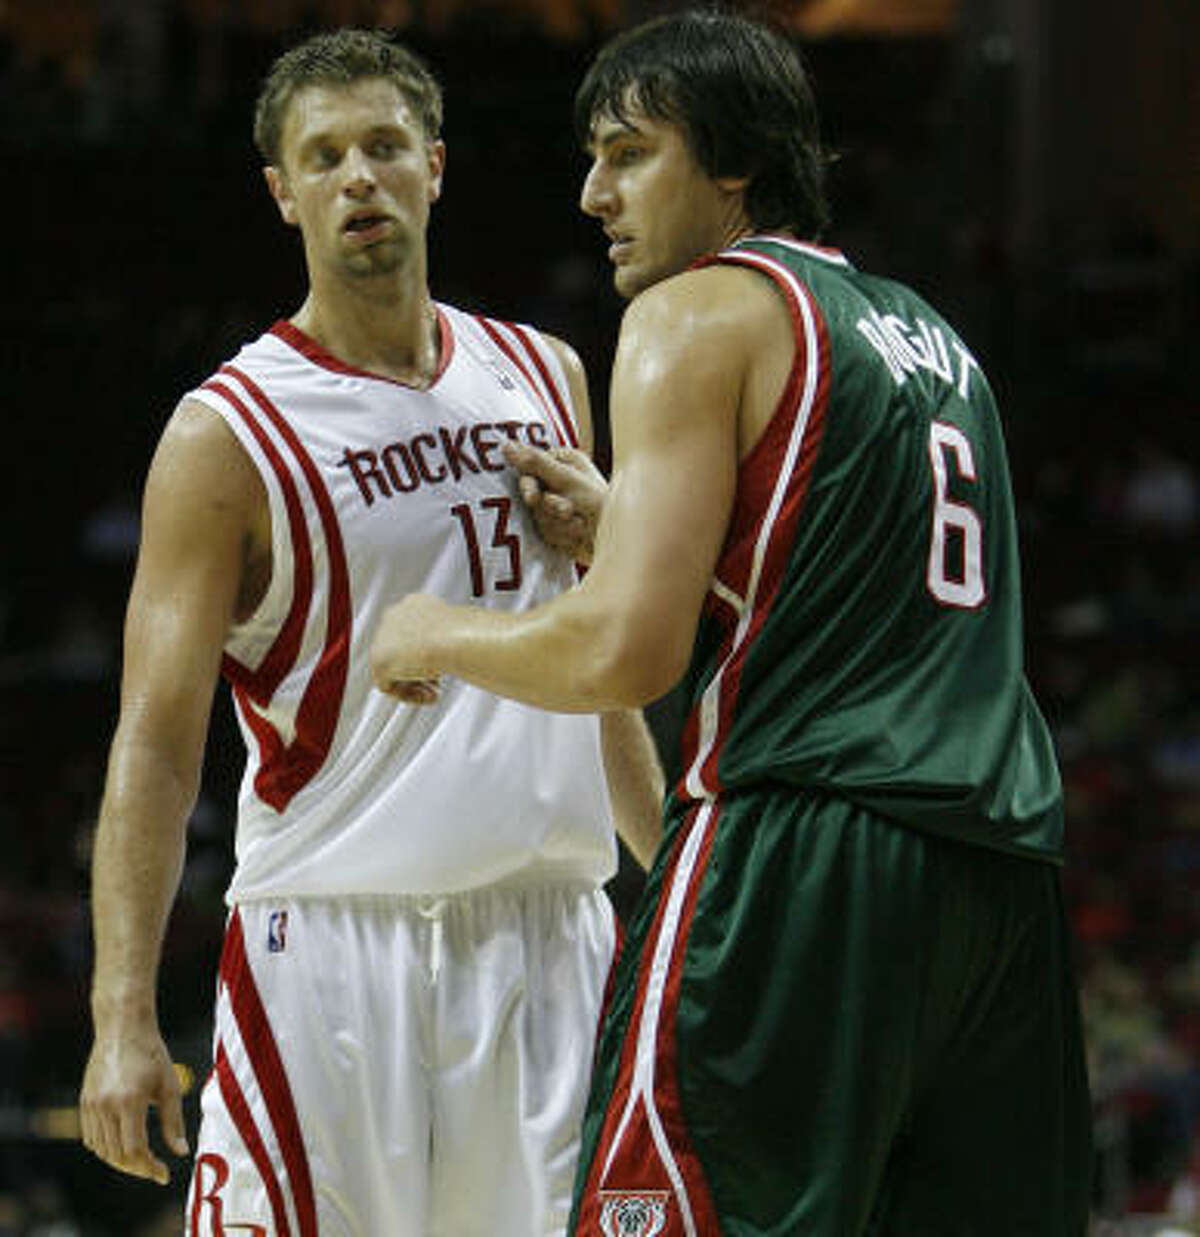 David Andersen, left, averaged 5.8 points and 3.3 rebounds in 63 games last season.